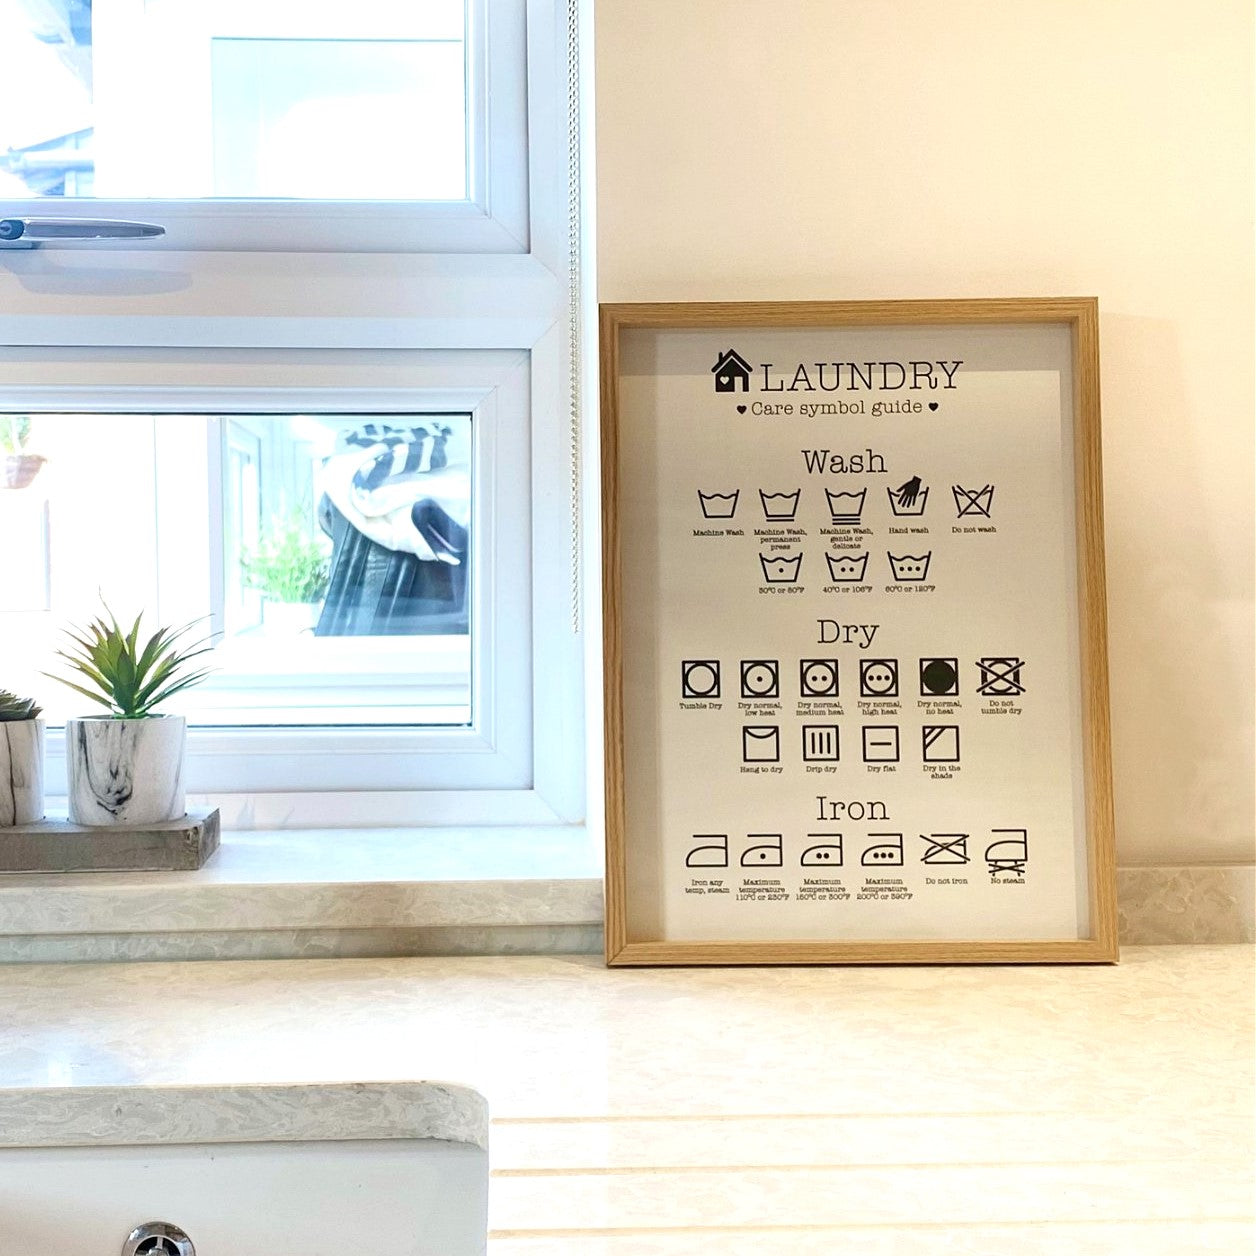 Laundry Care Symbol Guide in Frame